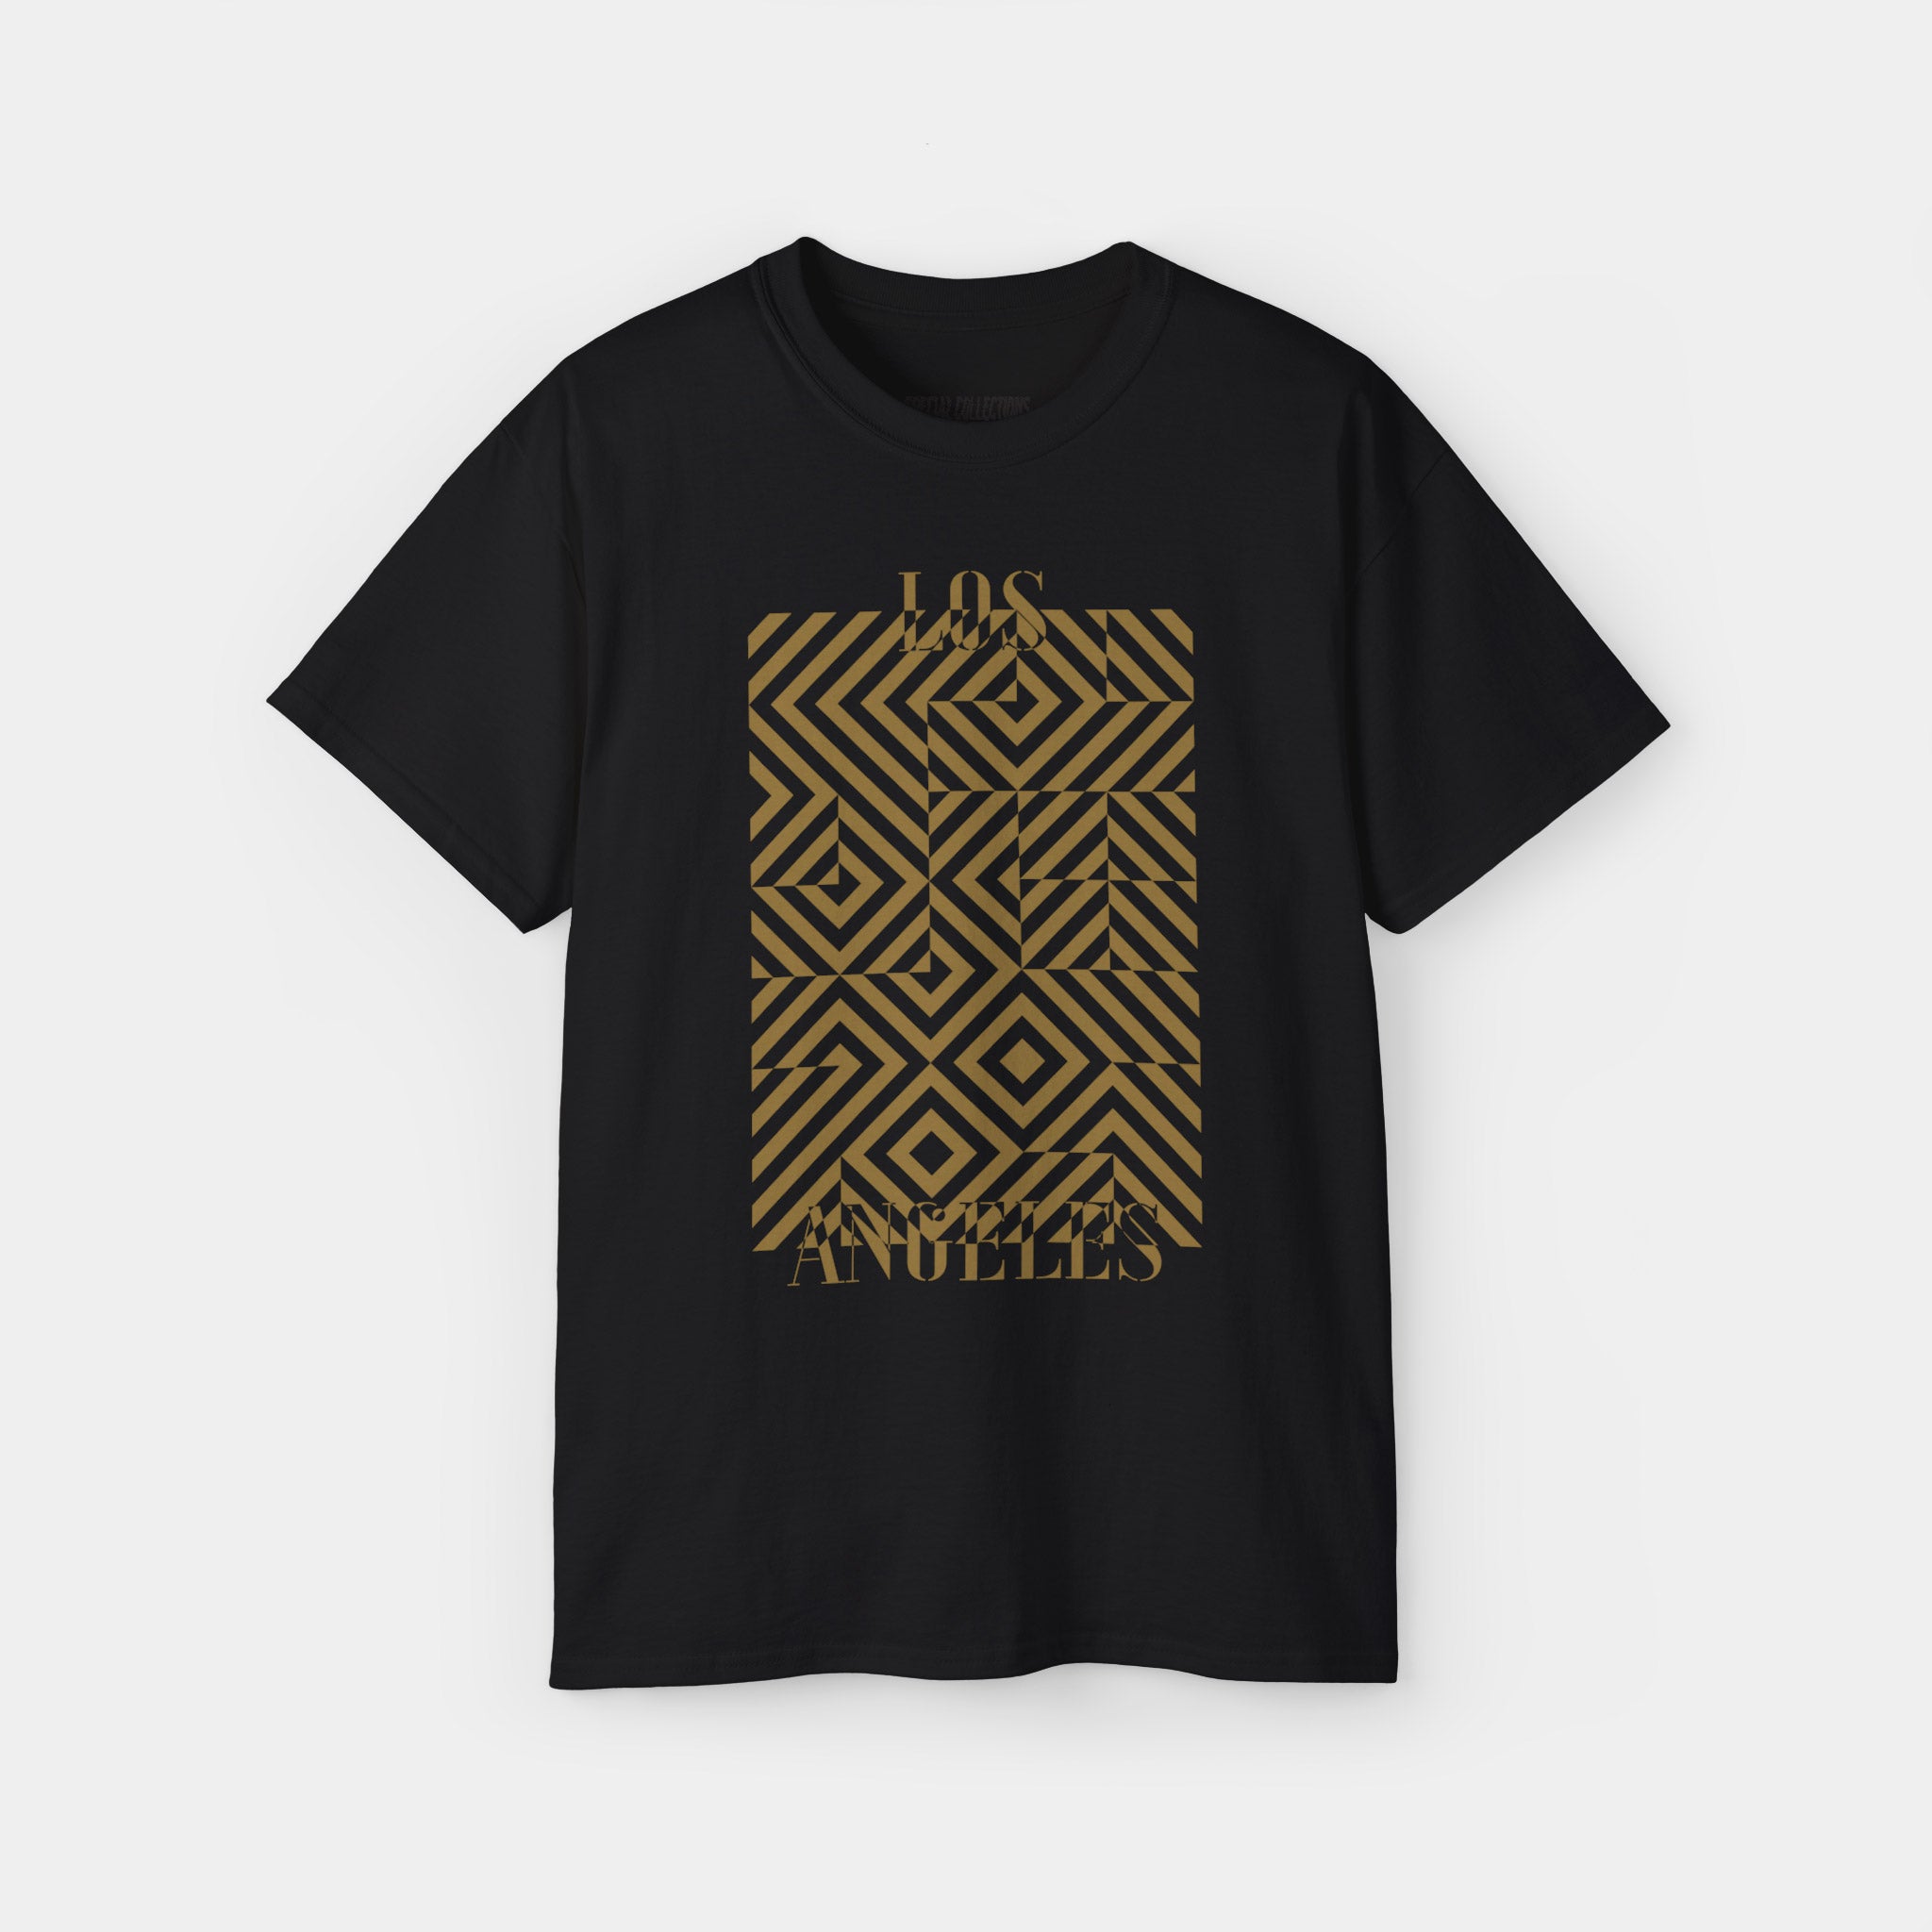 This Is Los Angeles (Wave 1D, LAFC) T-shirt